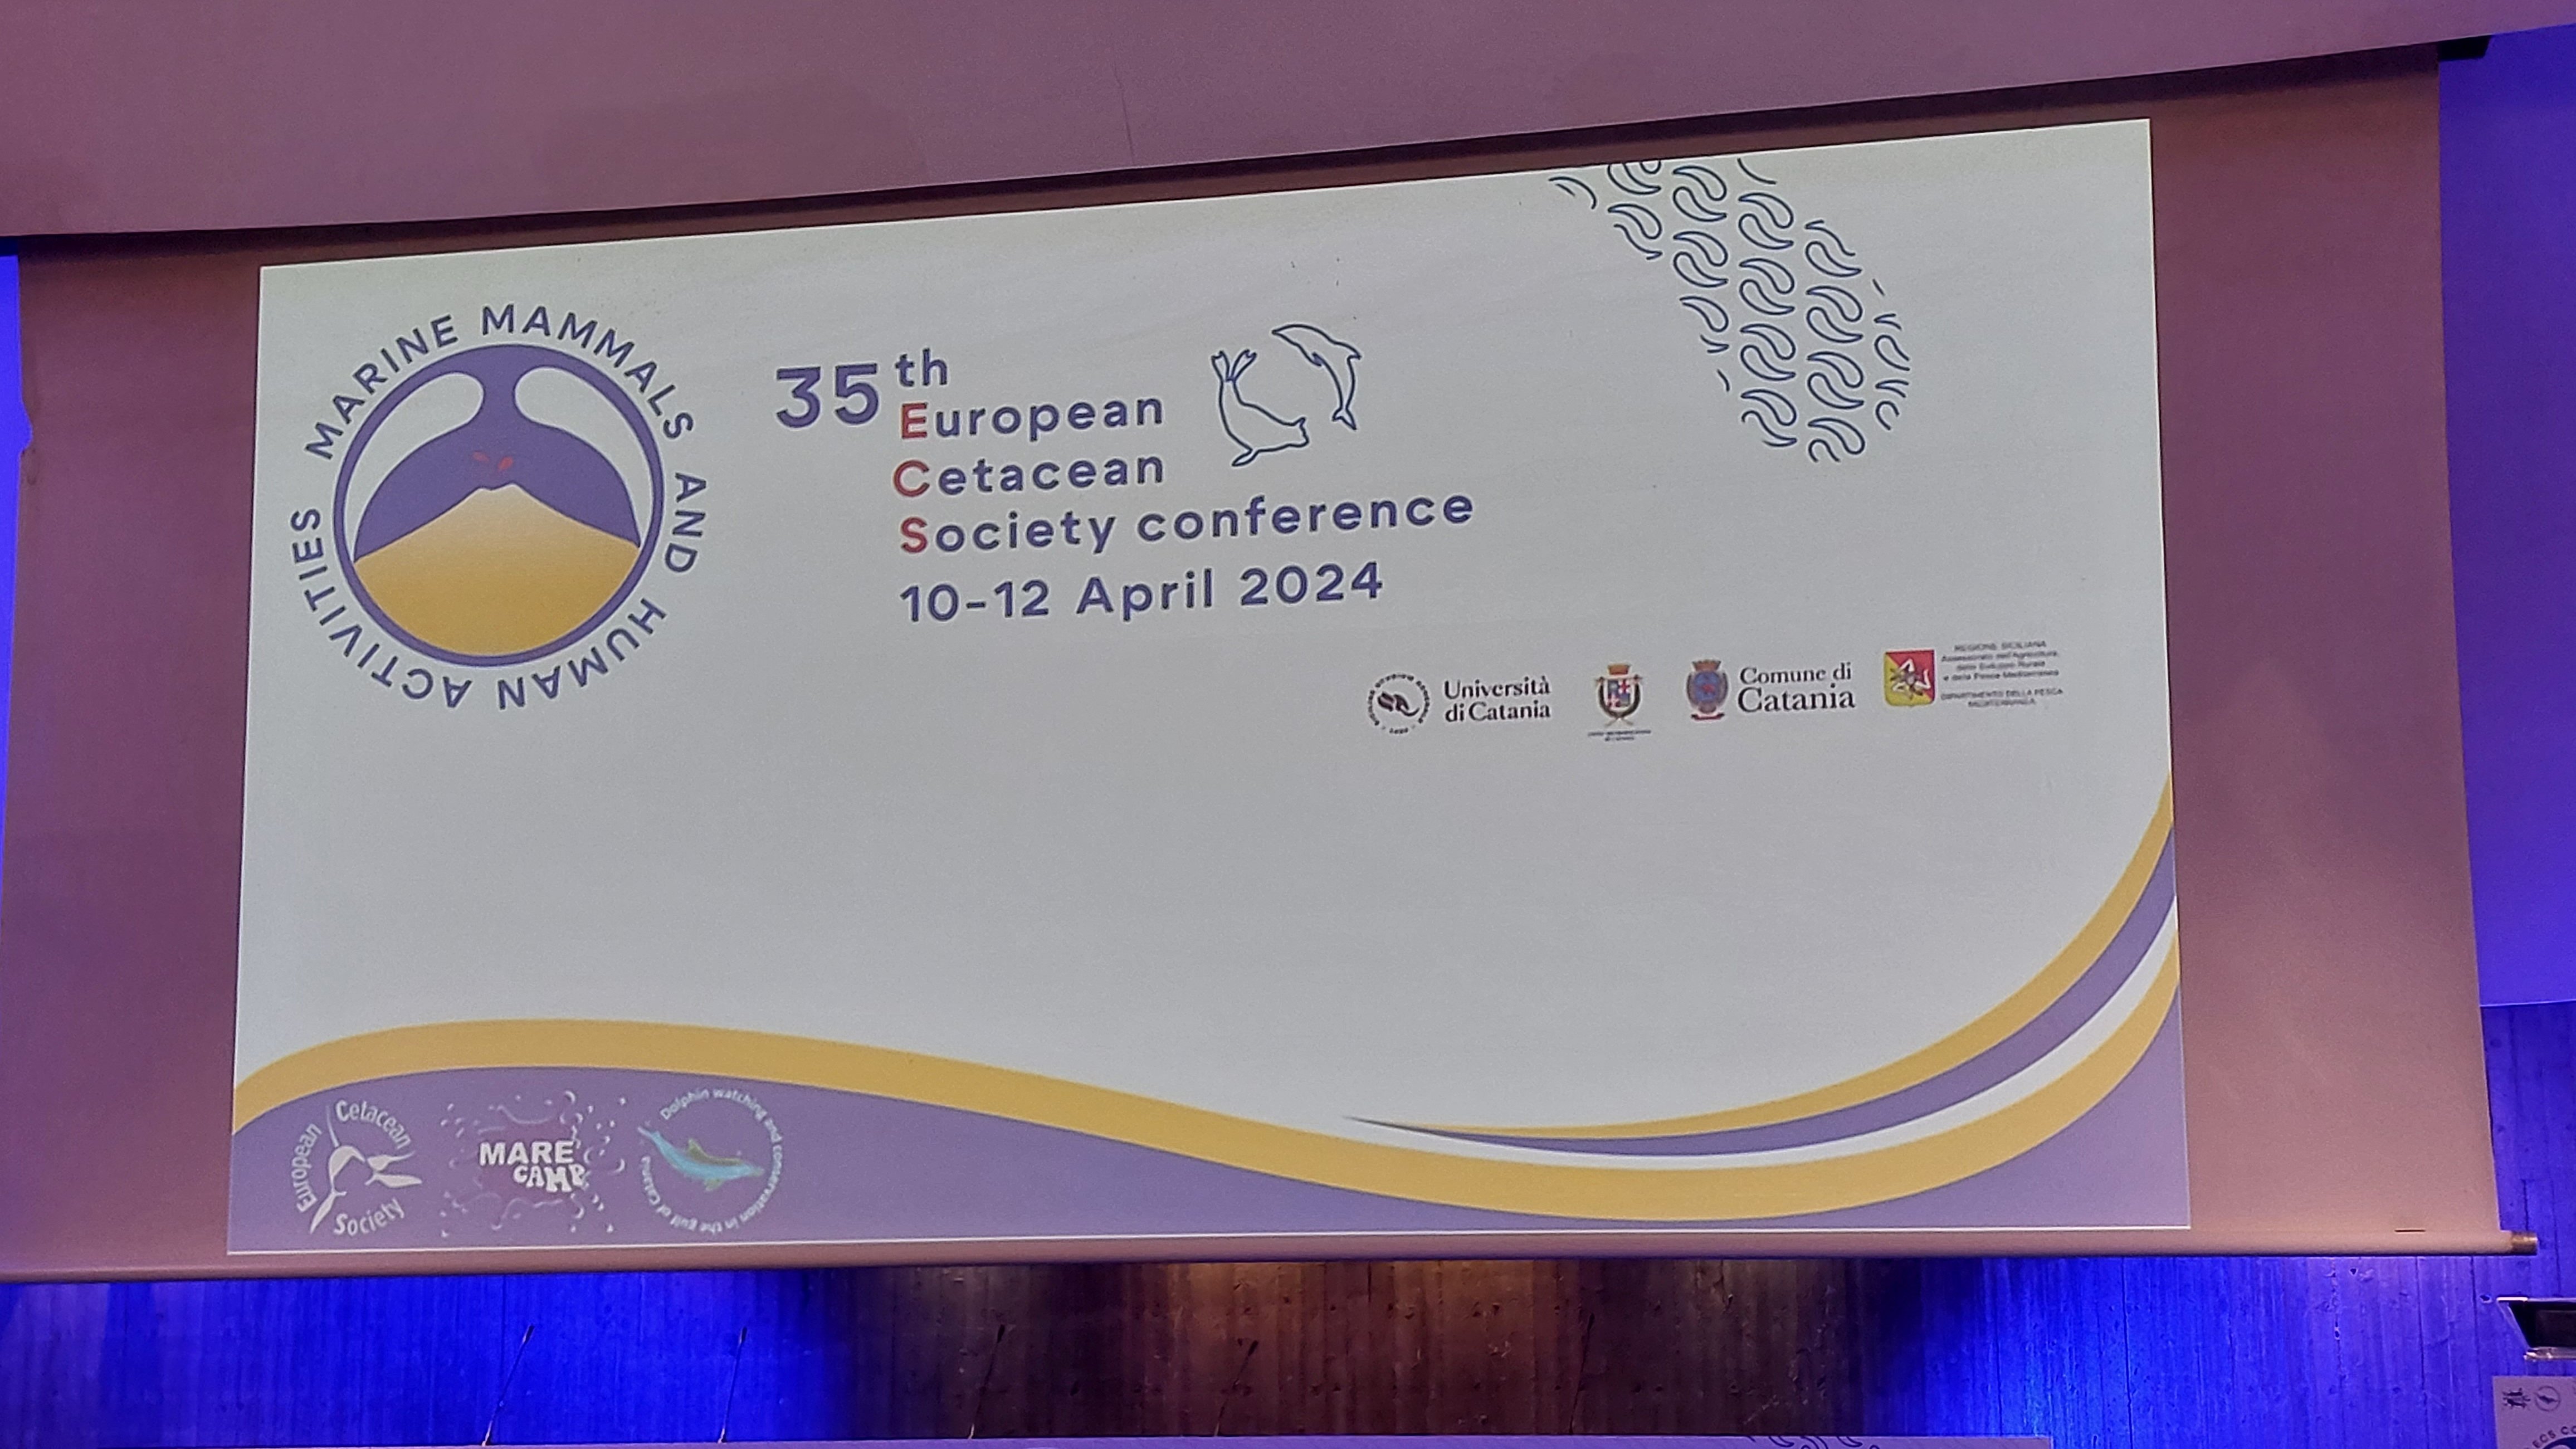 Screen above the podium at the 35th European Cetacean Society Conference, showing a slide with the title and logo of the conference.